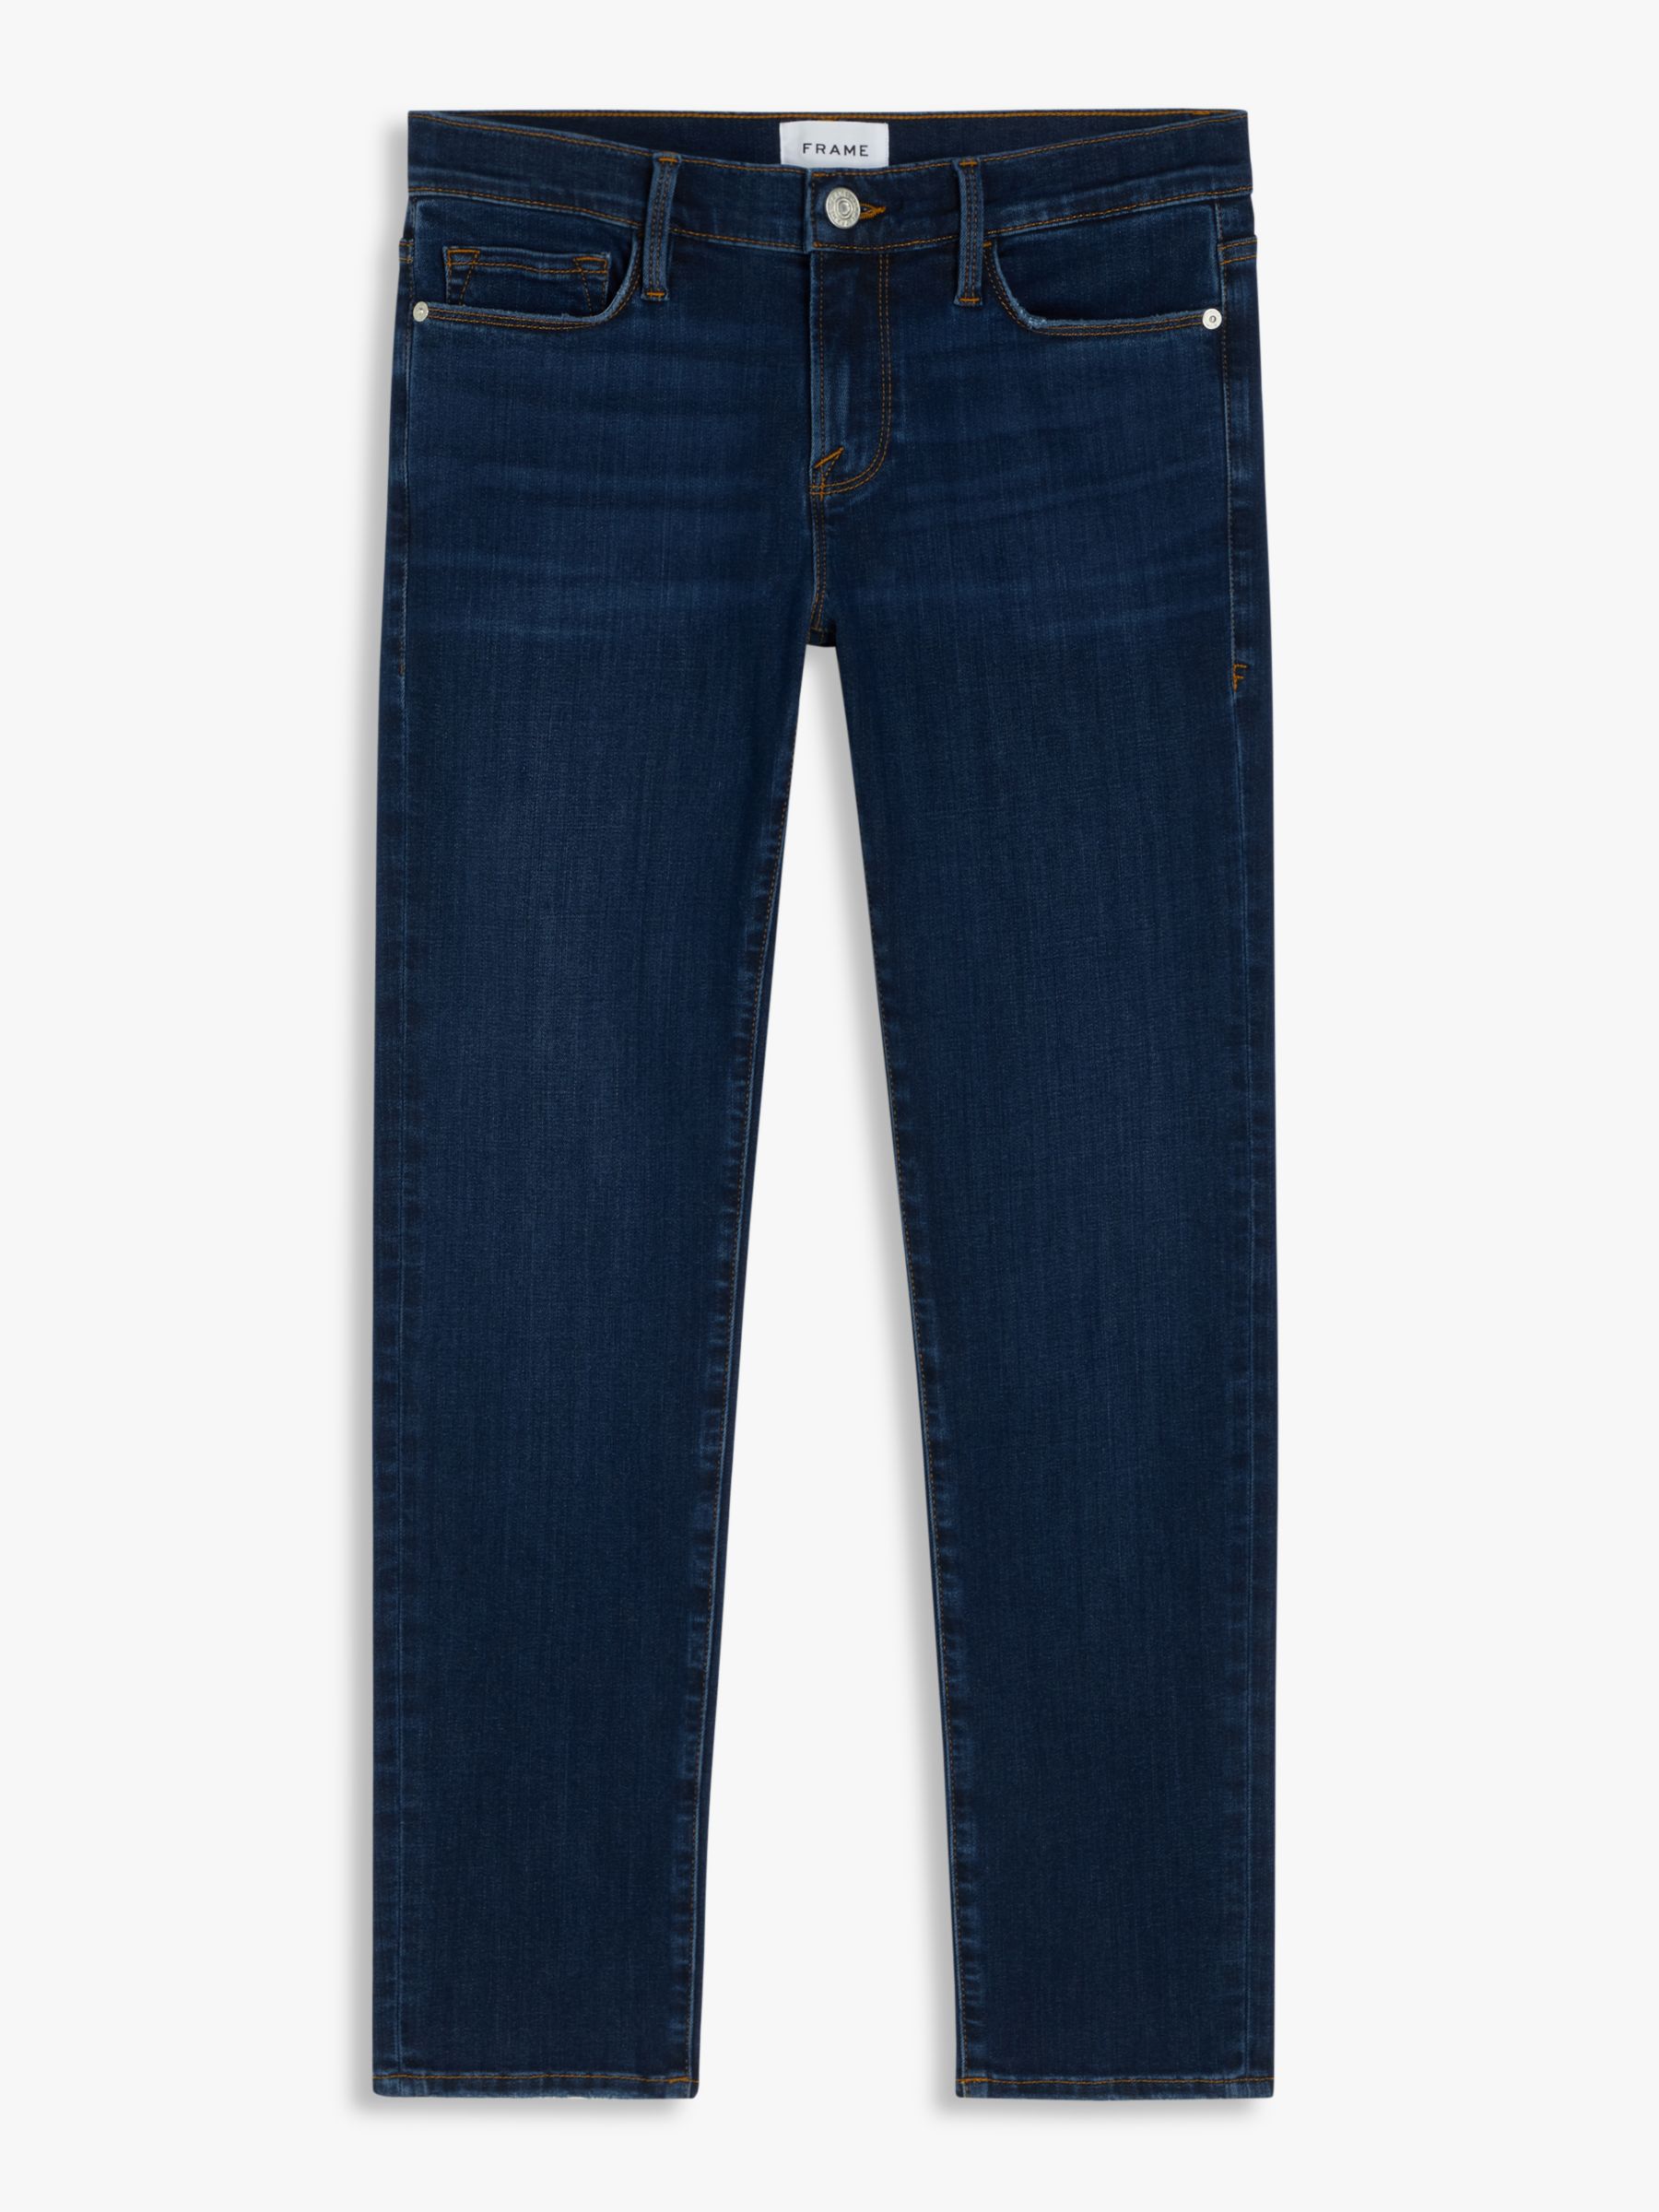 FRAME Le Garcon Tapered Jeans, Majesty at John Lewis & Partners